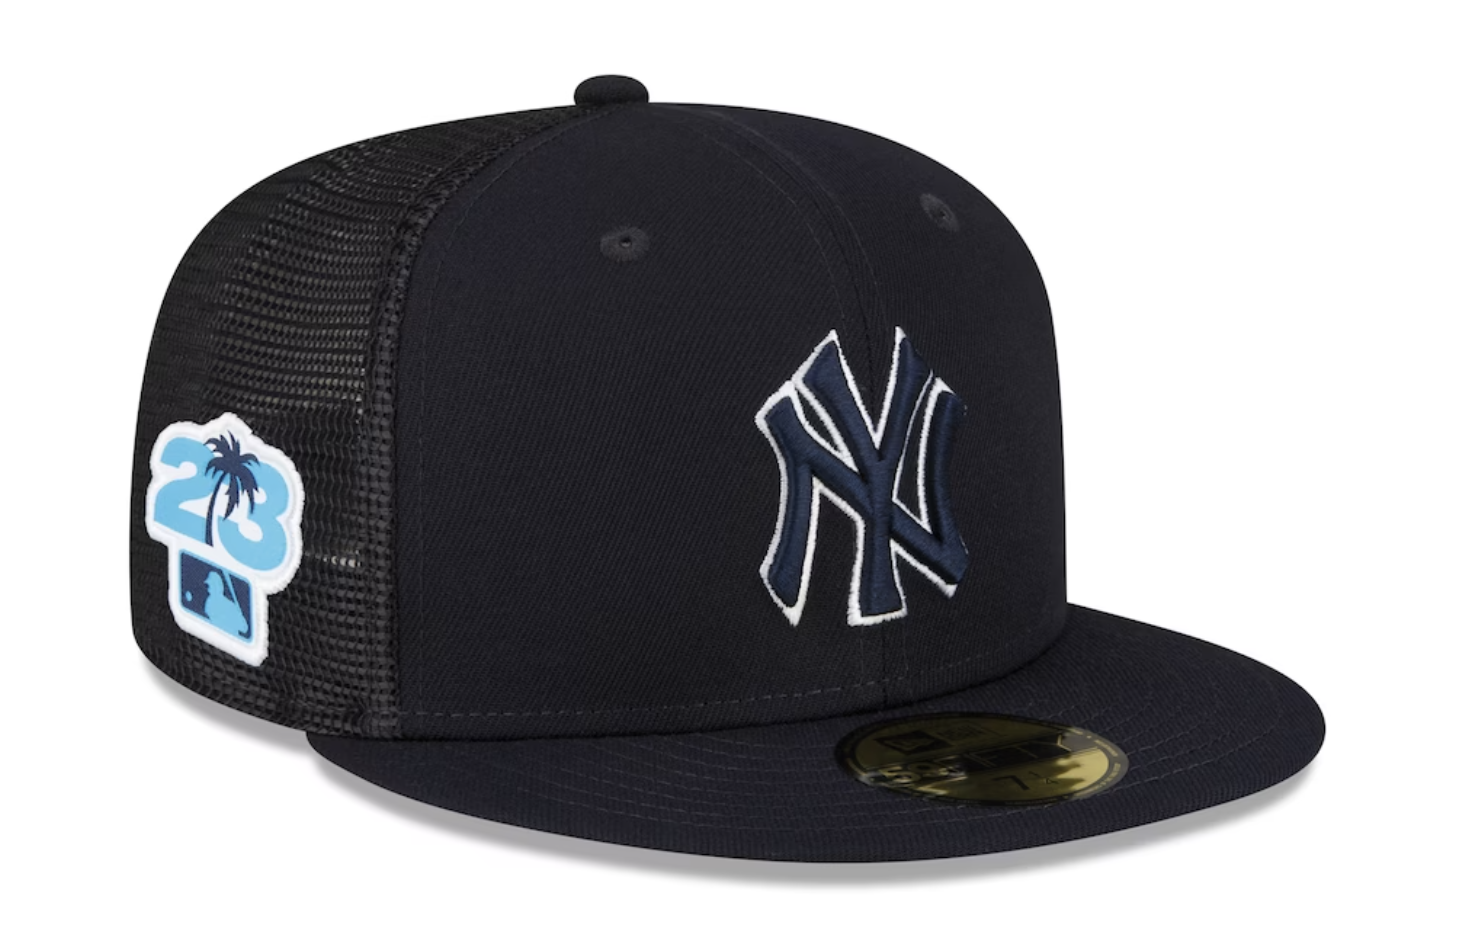 Yankees spring training gear: How to get MLB spring training 2023 gear  online